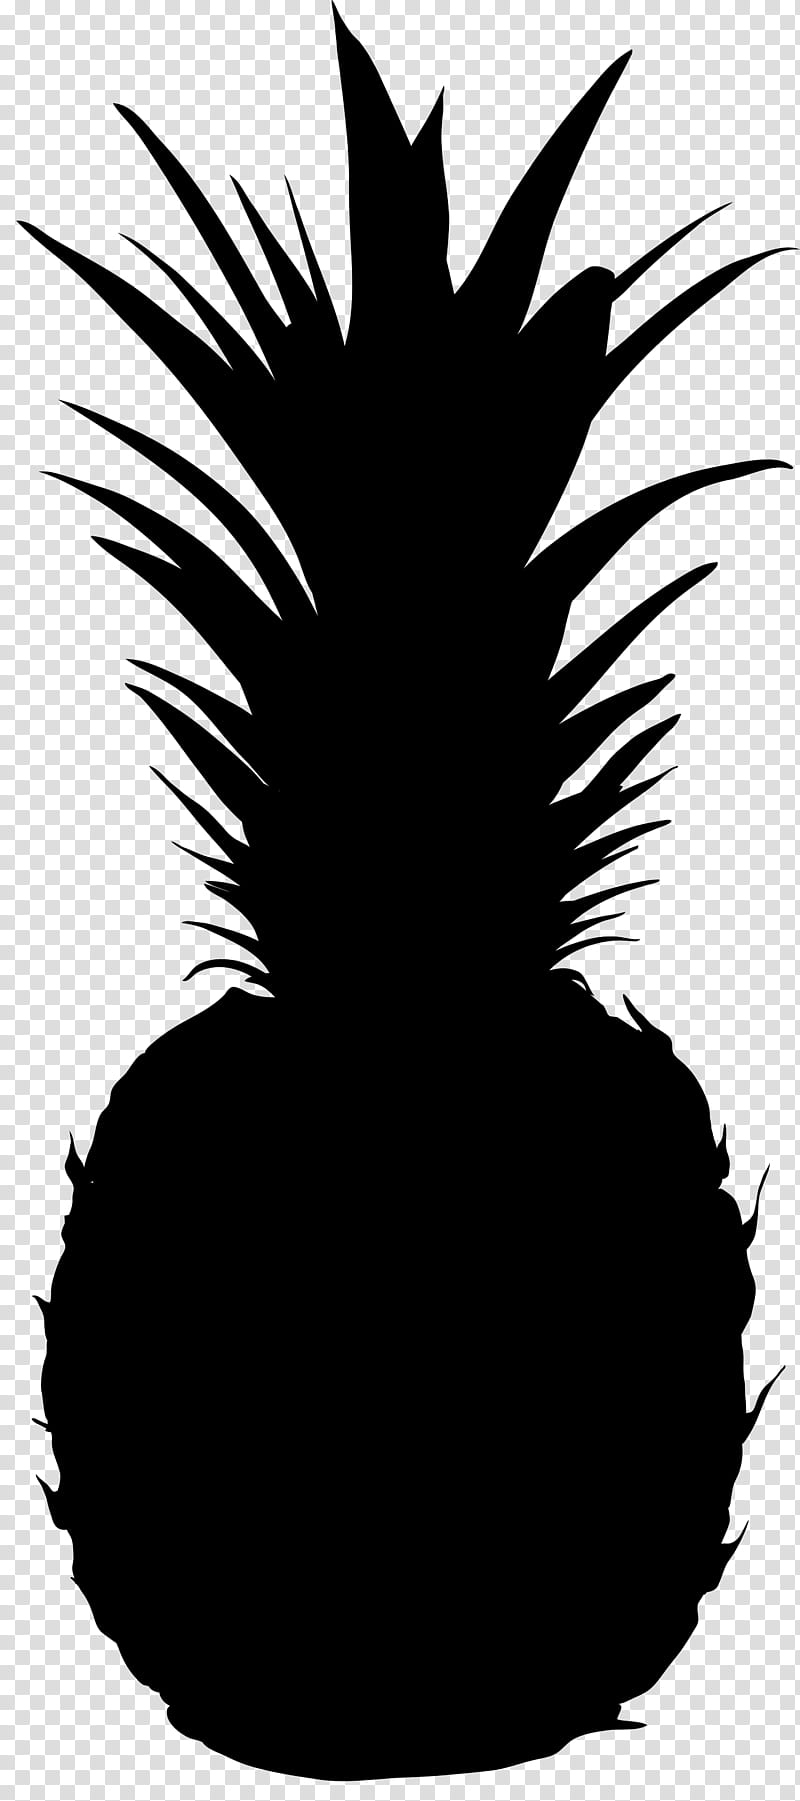 Palm Tree Drawing, Silhouette, Pineapple, Pineapple Cake, Fruit, Black, Ananas, Plant transparent background PNG clipart